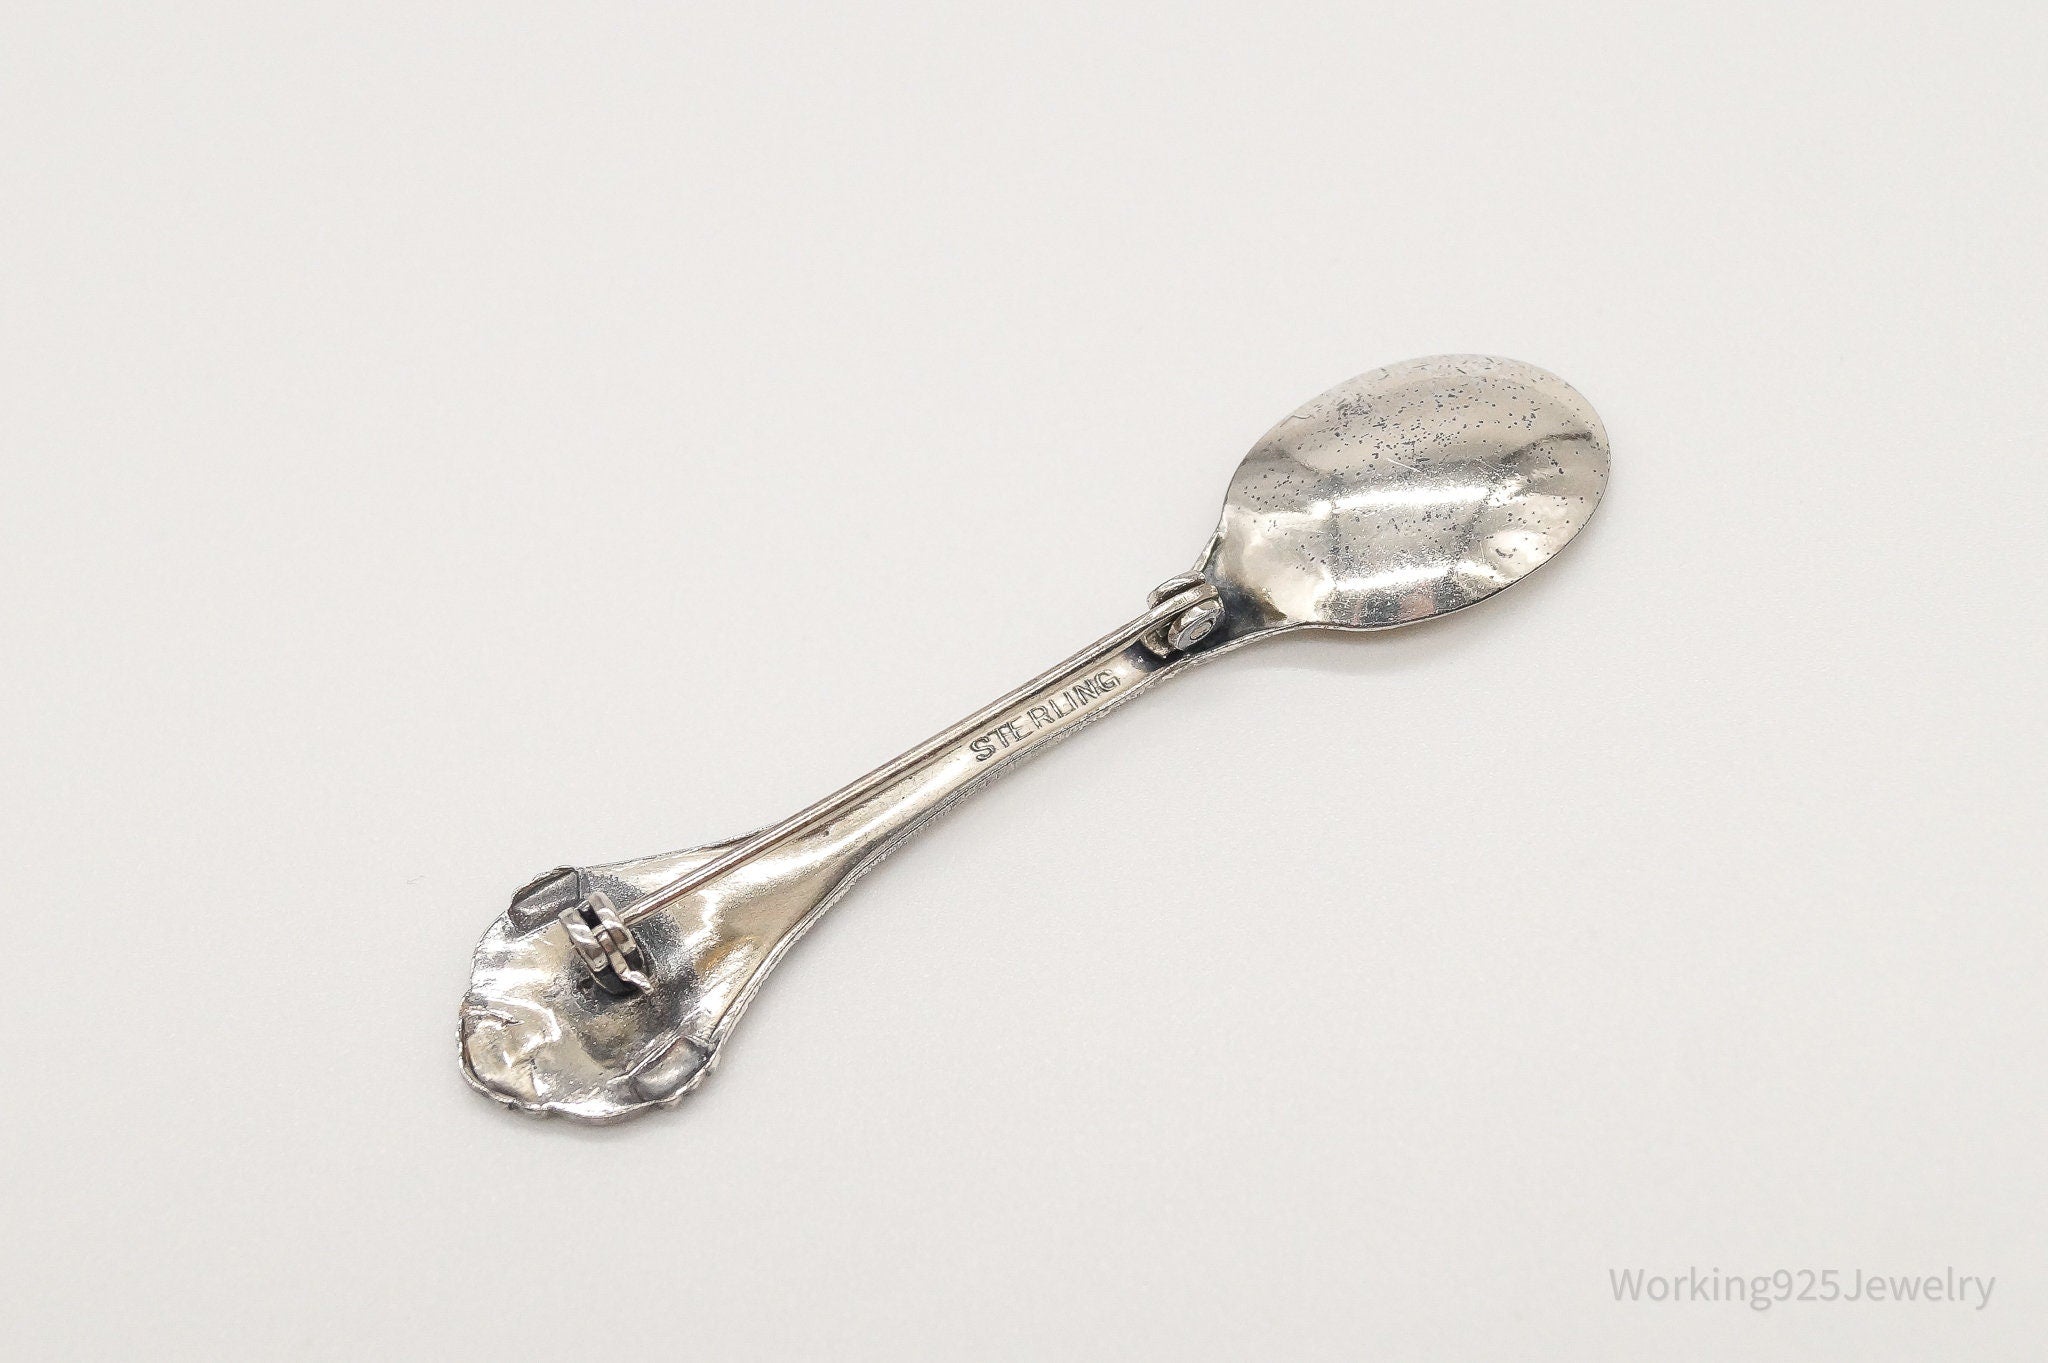 Antique Spoon Sterling Silver Brooch Pin